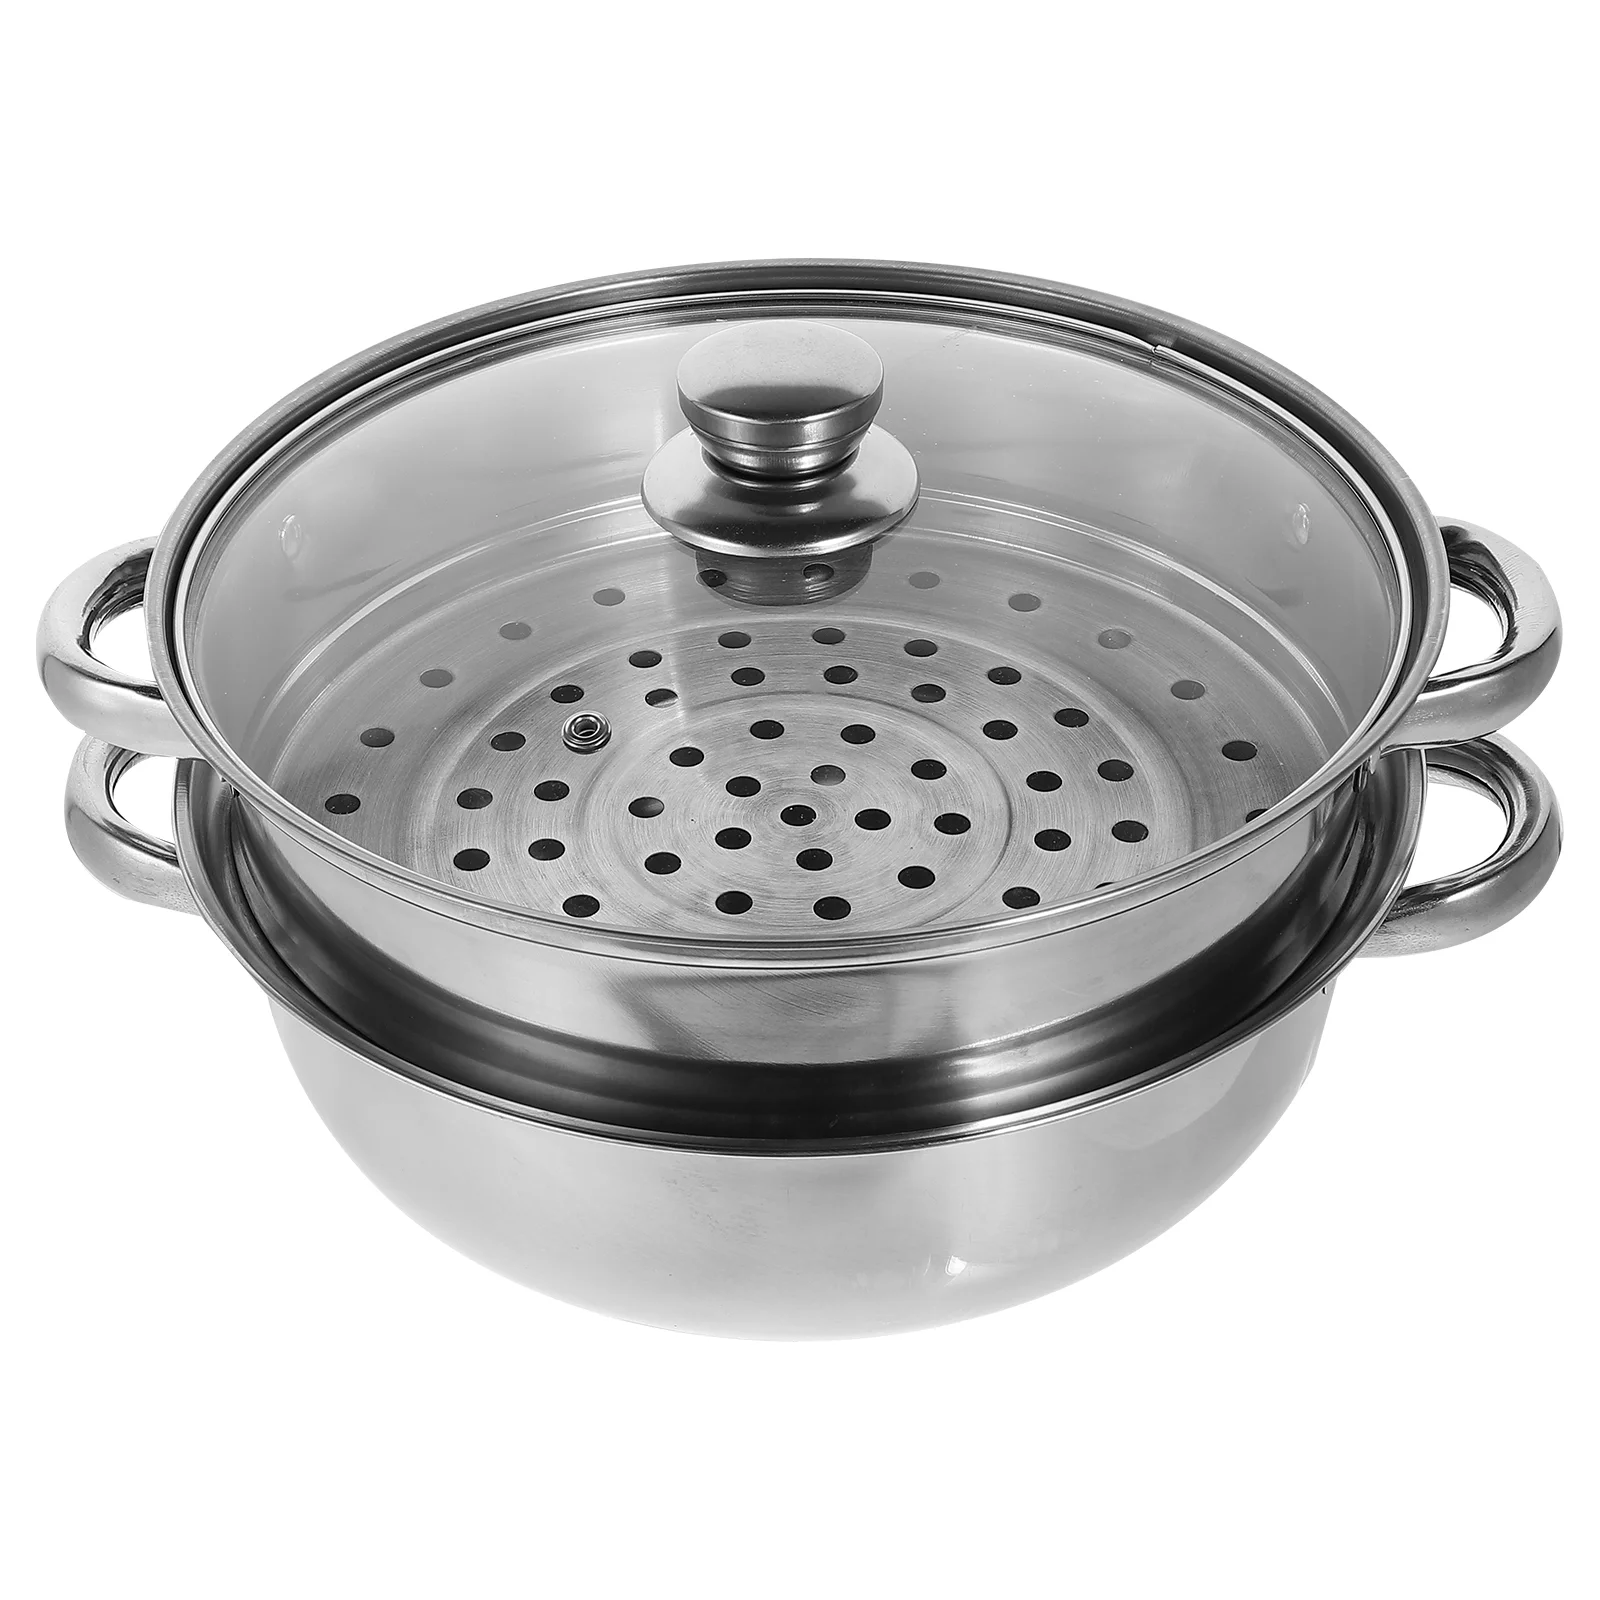 

Stainless Steel Steamer Home Cooking Basket Lidded Food Premium Pot Multi-functional Reusable Metal Utensils They are finished